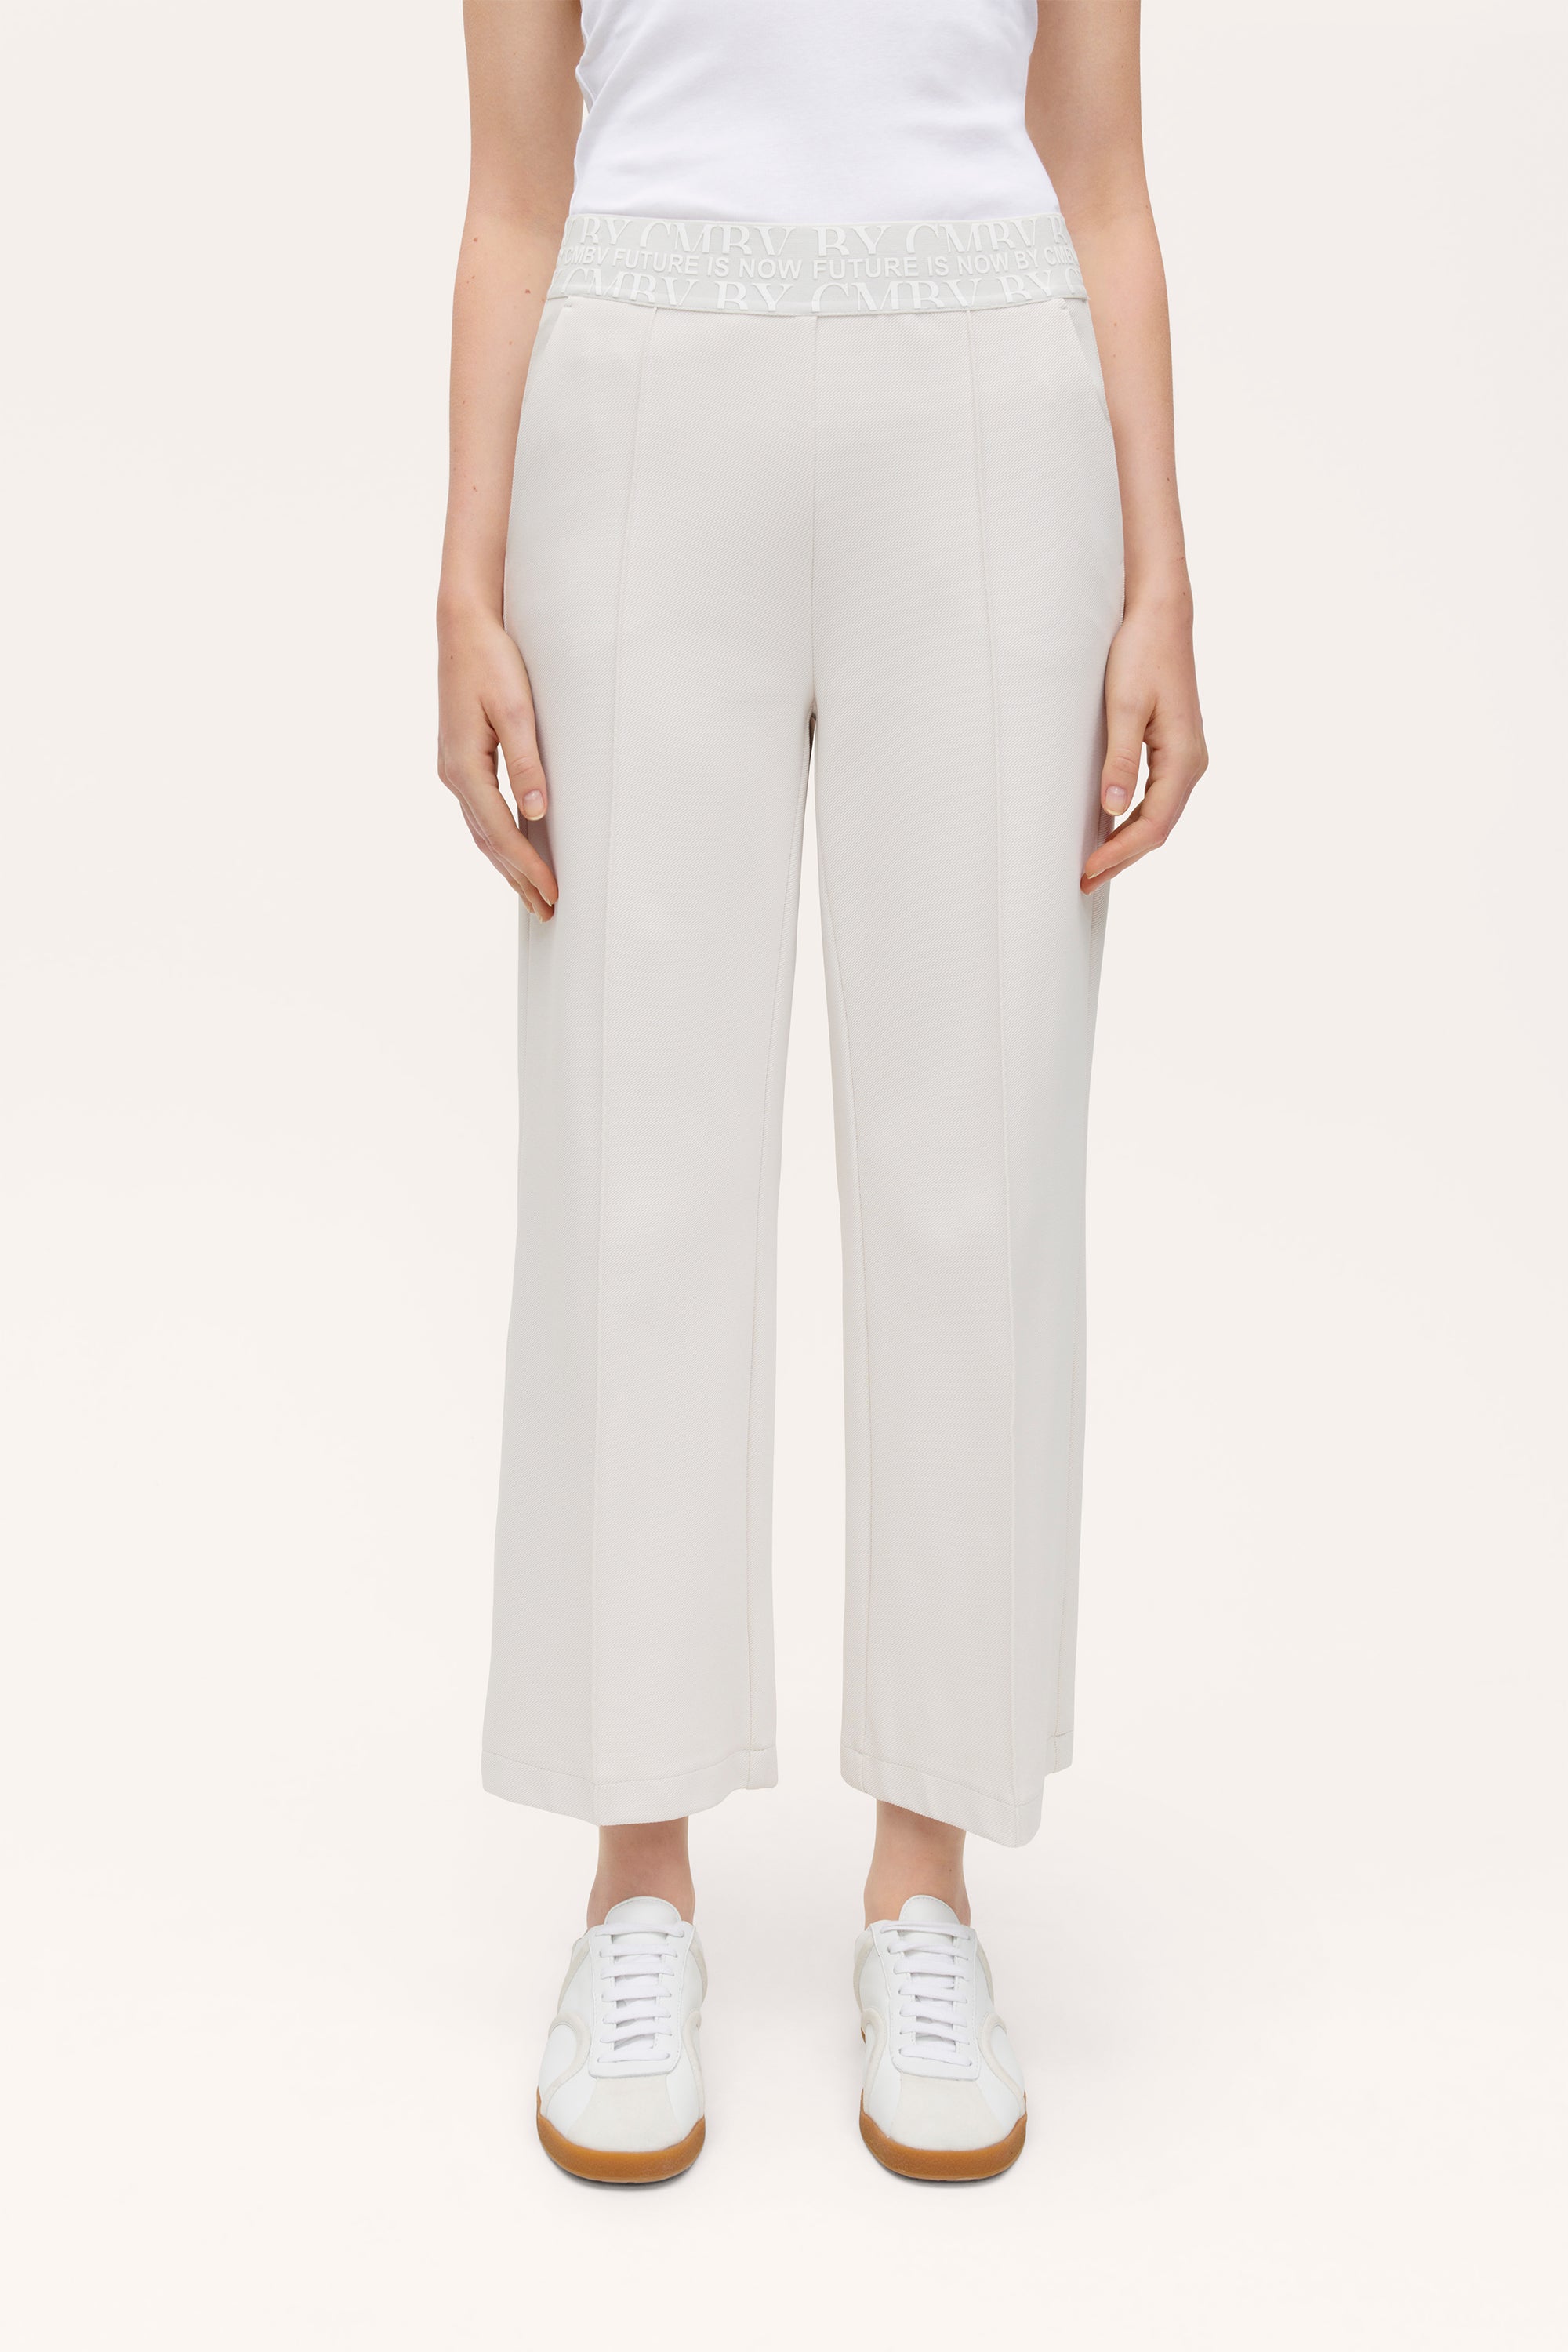 Cameron Pant by Cambio